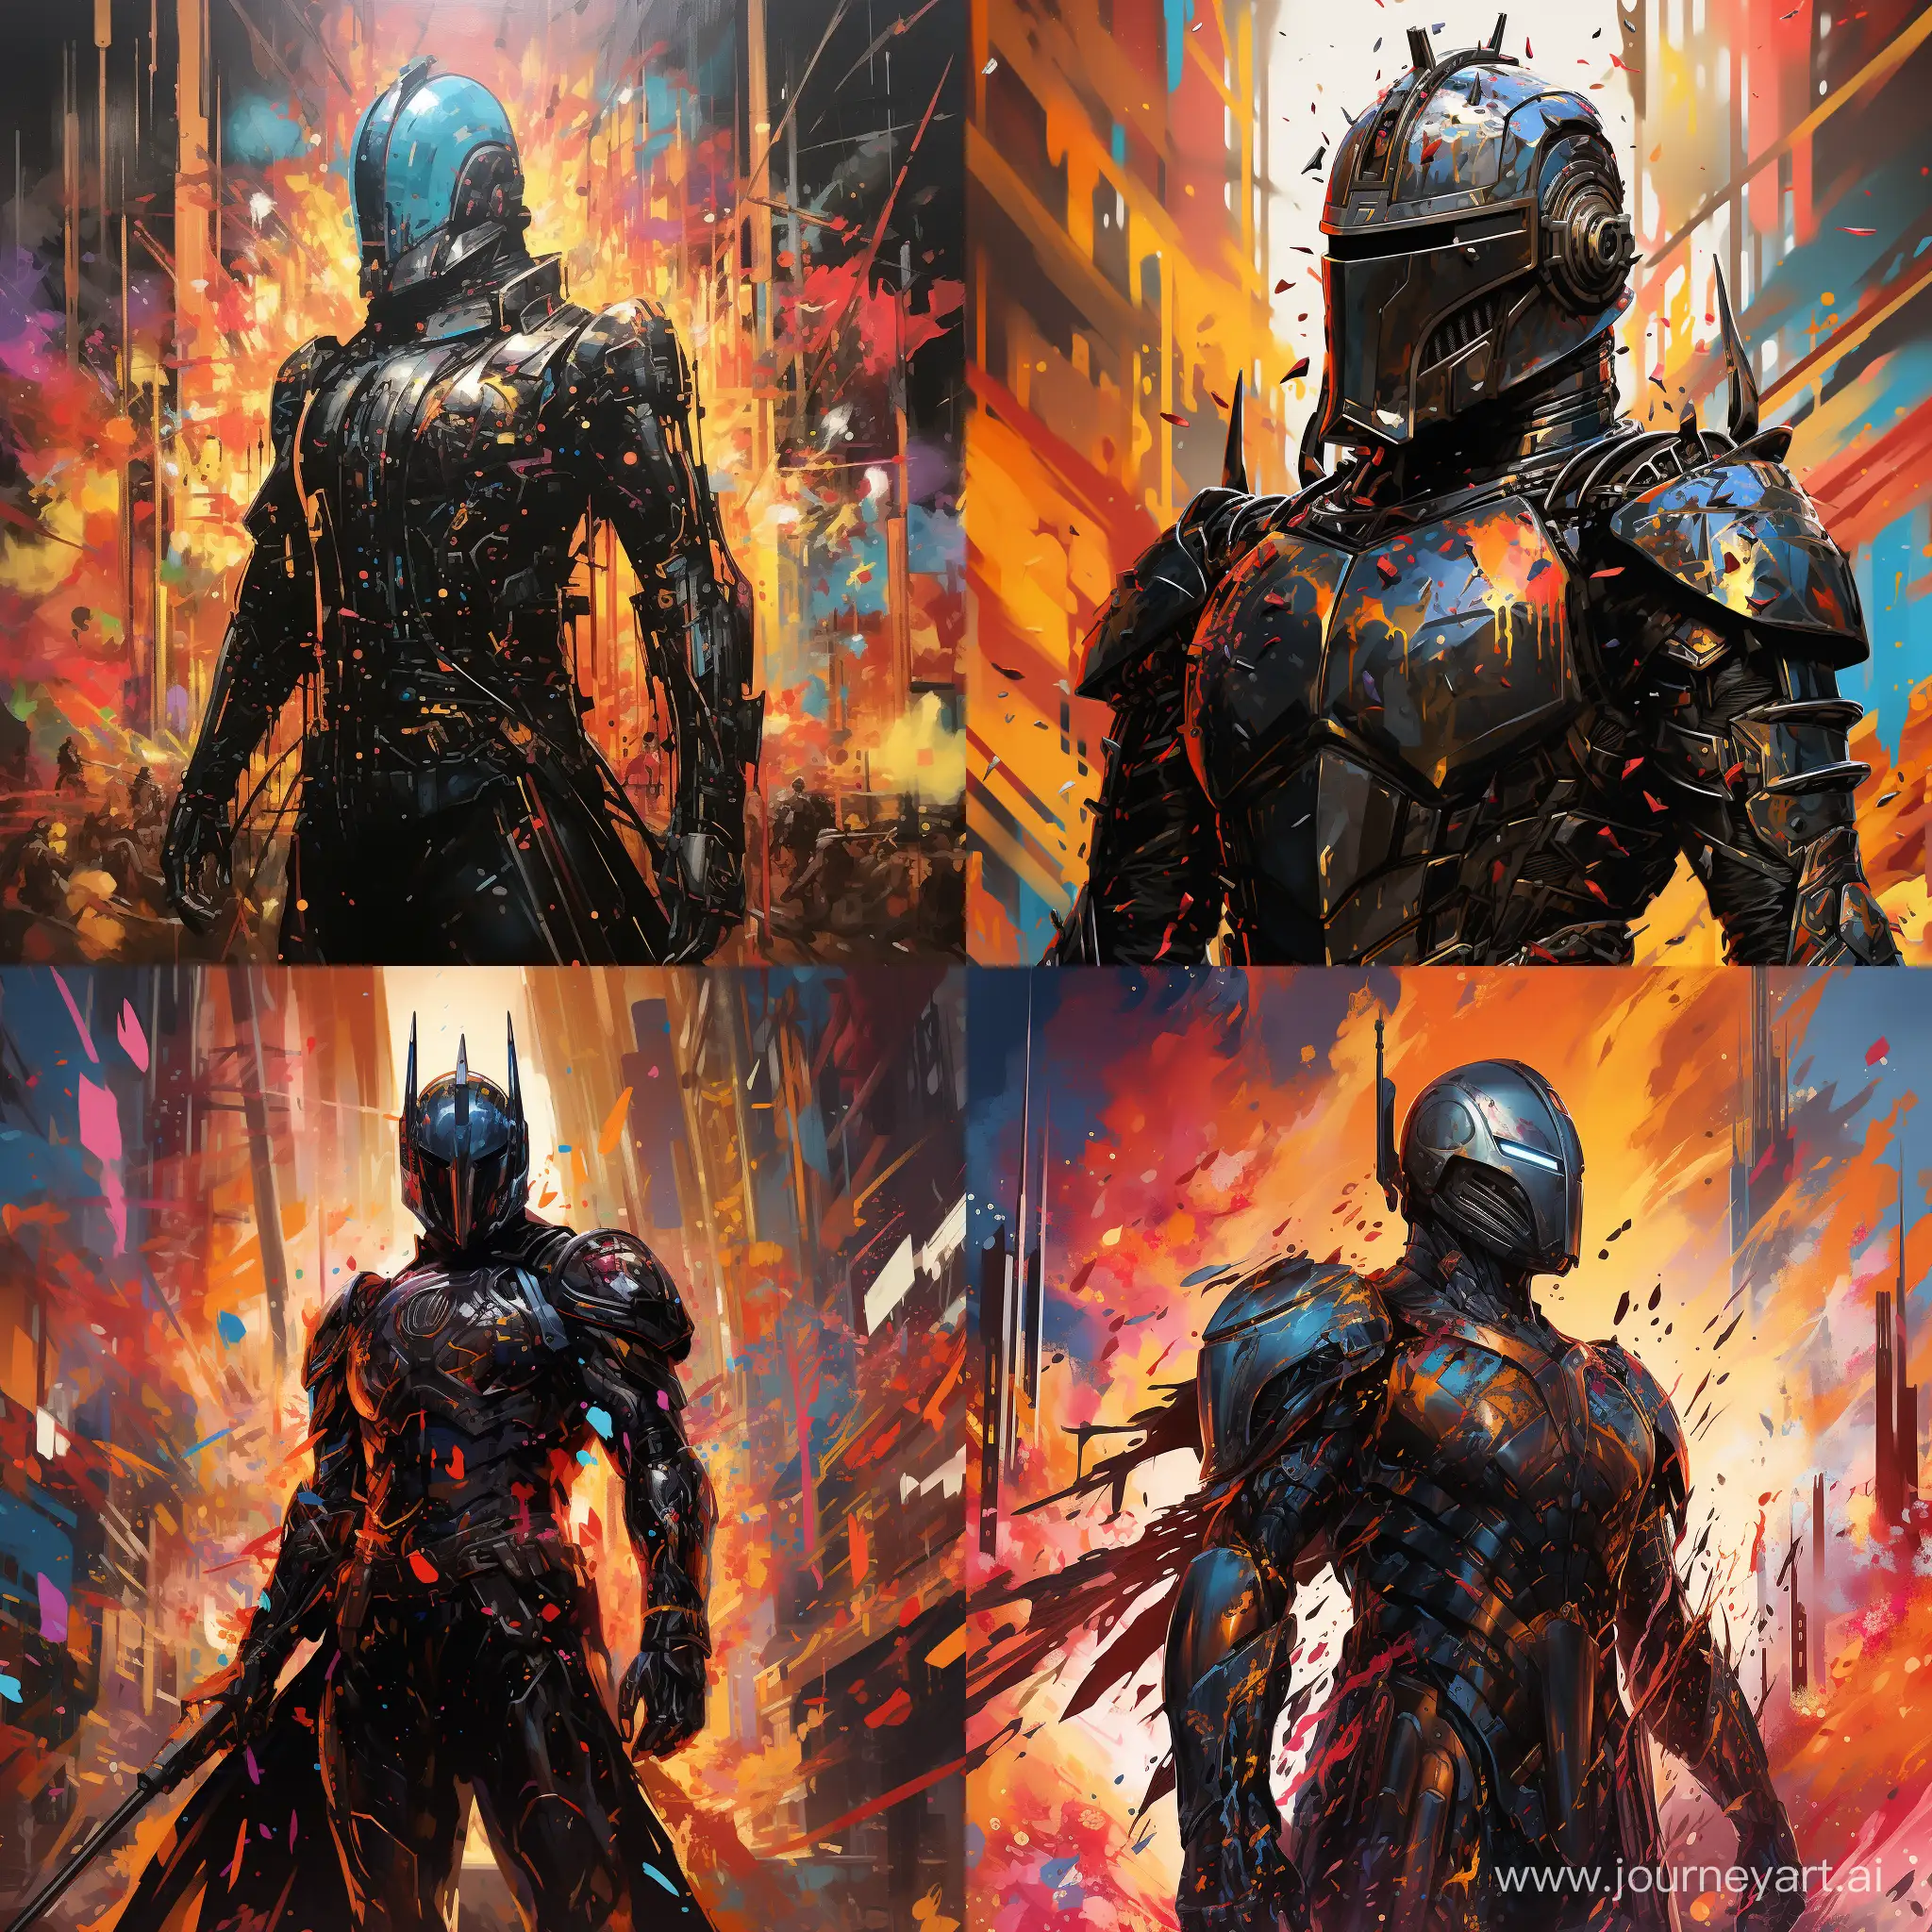 stands tall, The Black::1.1 knight::1.1 stands tall, in cyberpunk style, stands tall, explosion of color::0.9, abstraction::1.1, unusual, interesting, --s 250